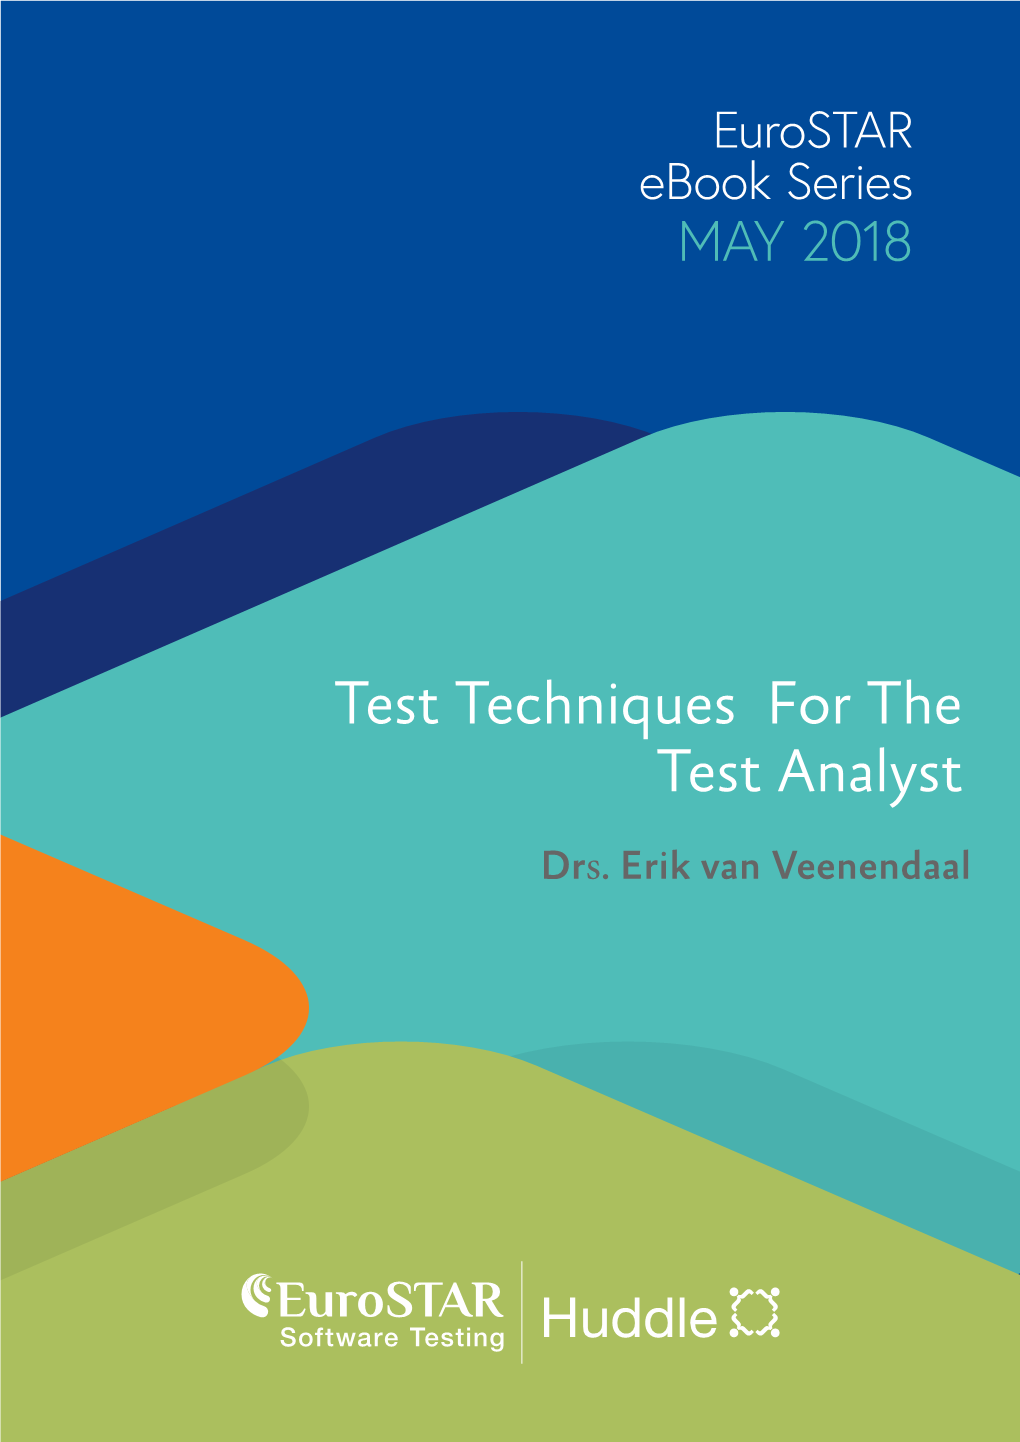 Test Techniques for the Test Analyst